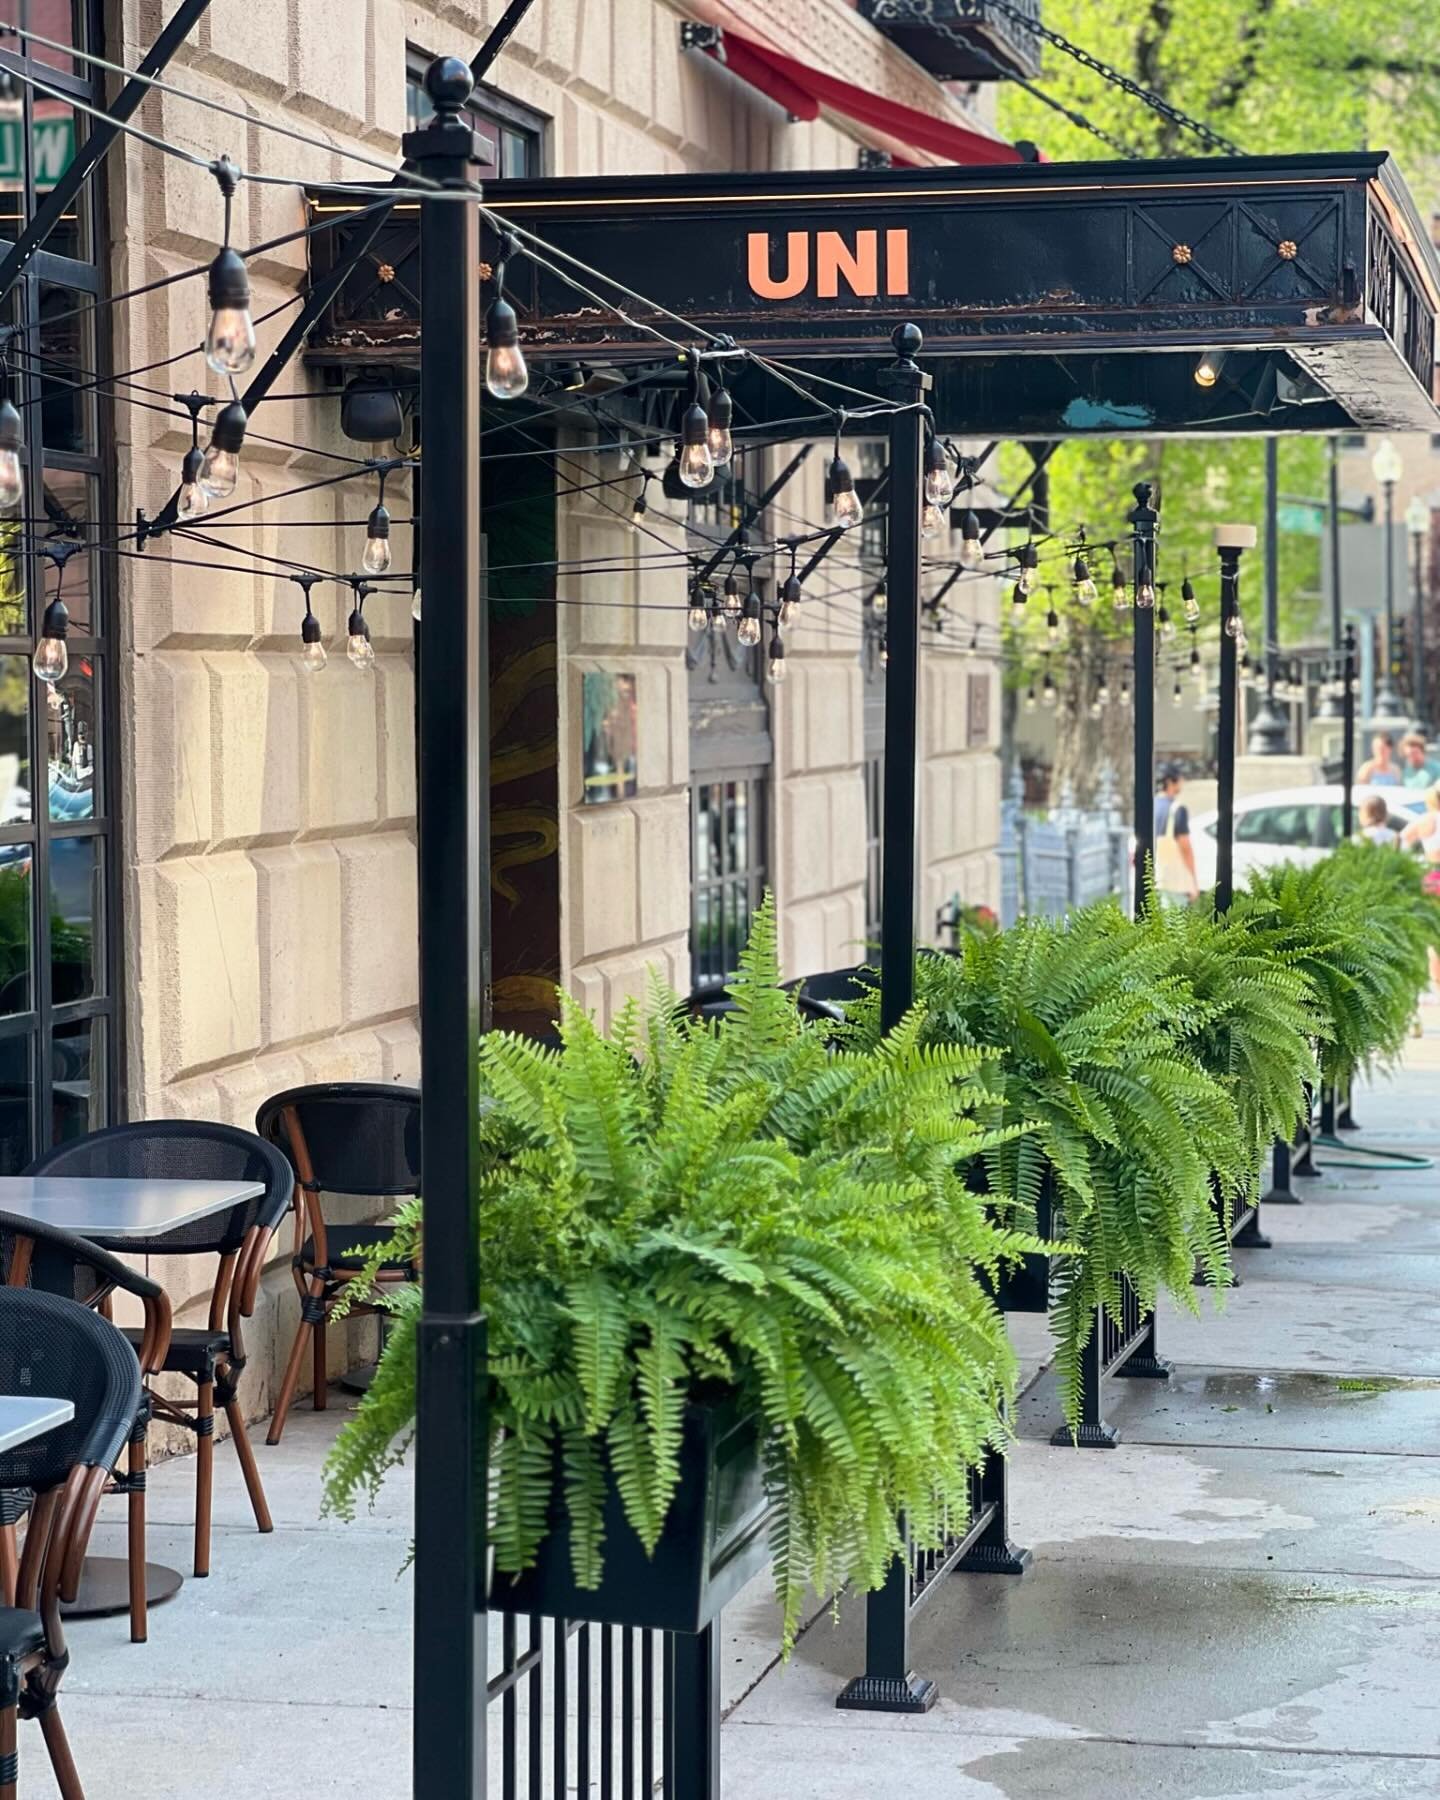 Fresh and lush Boston ferns for @uni_boston! These beauties are always such a perfect addition to any outdoor space! 

#uniboston #theeliothotel #orlykhonfloral #okfdesigns #outdoorplanting #plantstyling #outdoorplantstyling #bostonfern